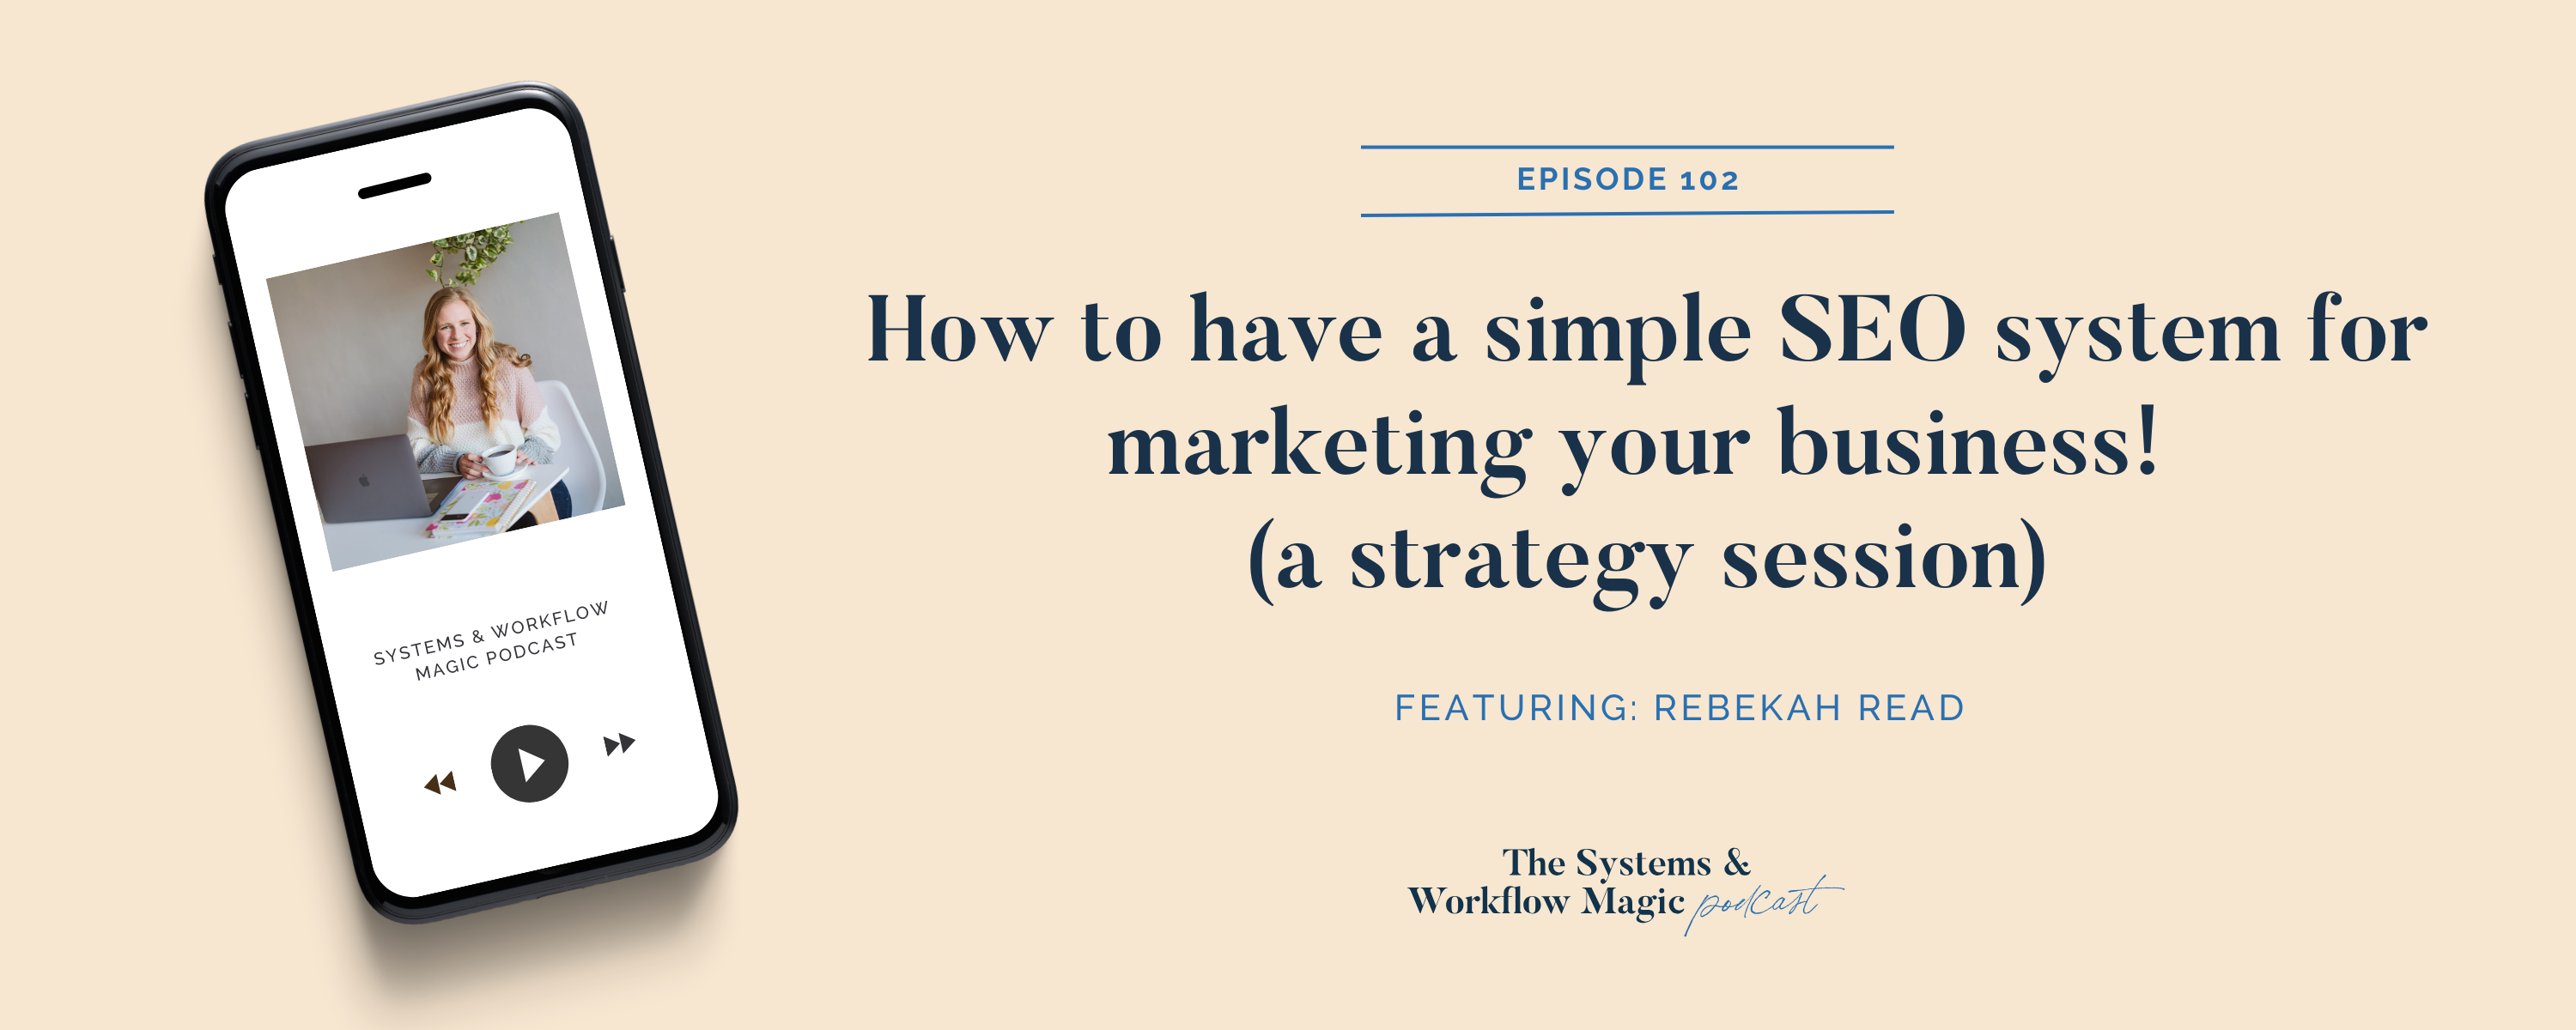 blog_banner_for_episode_102_of_the_systems_and_workflow_magic_podcast_featuring_rebekah_read_a_simple_seo_strategy_session